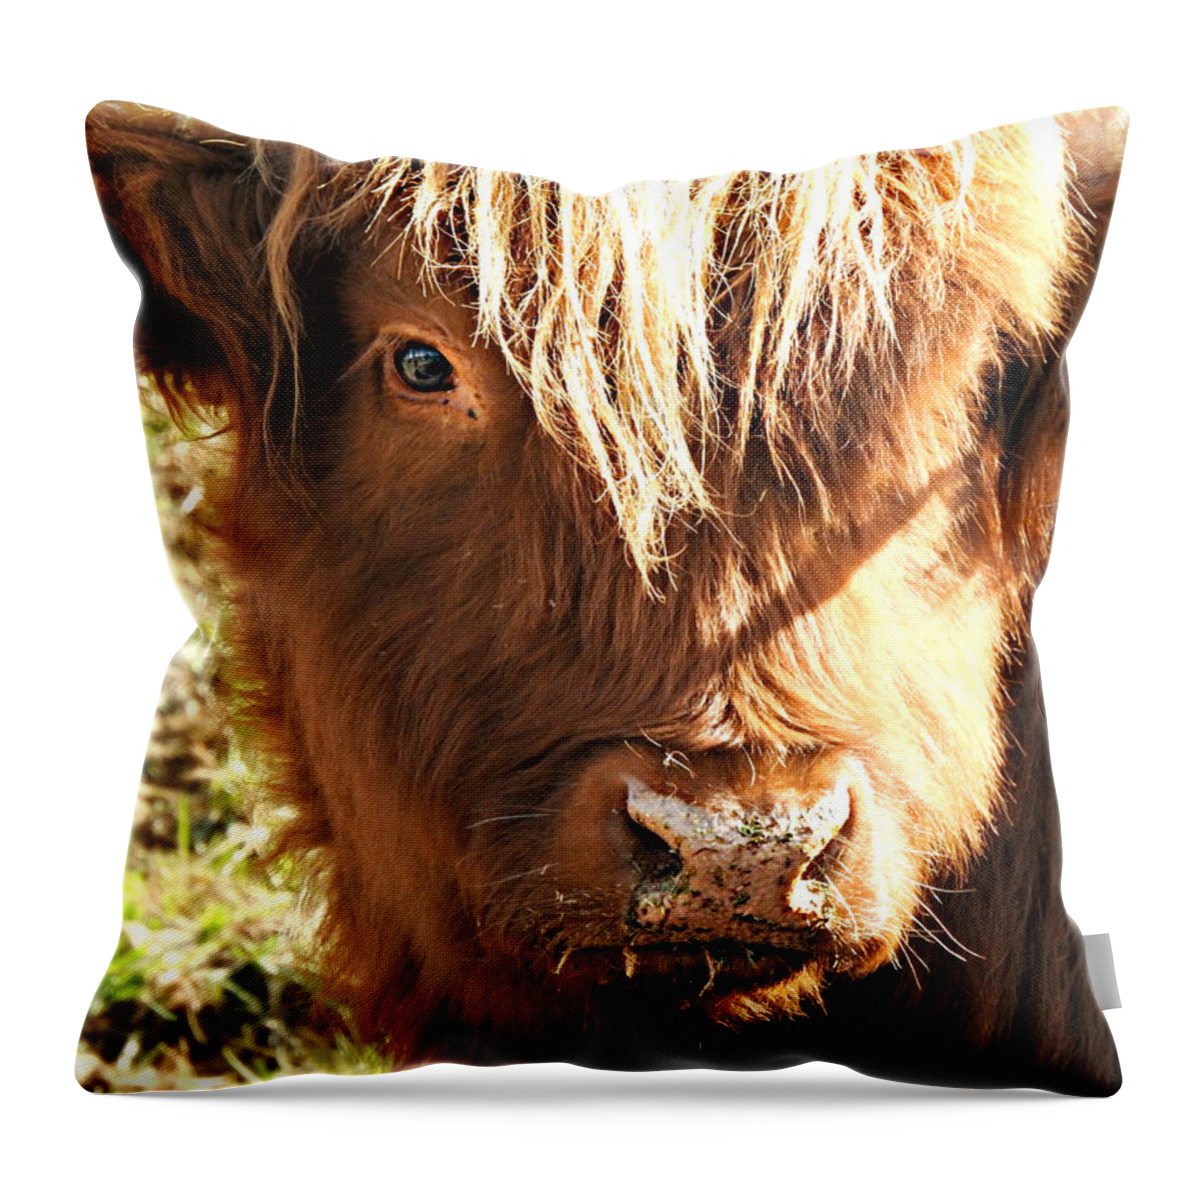 Sunkissed Throw Pillow featuring the photograph Sunkissed by Dark Whimsy